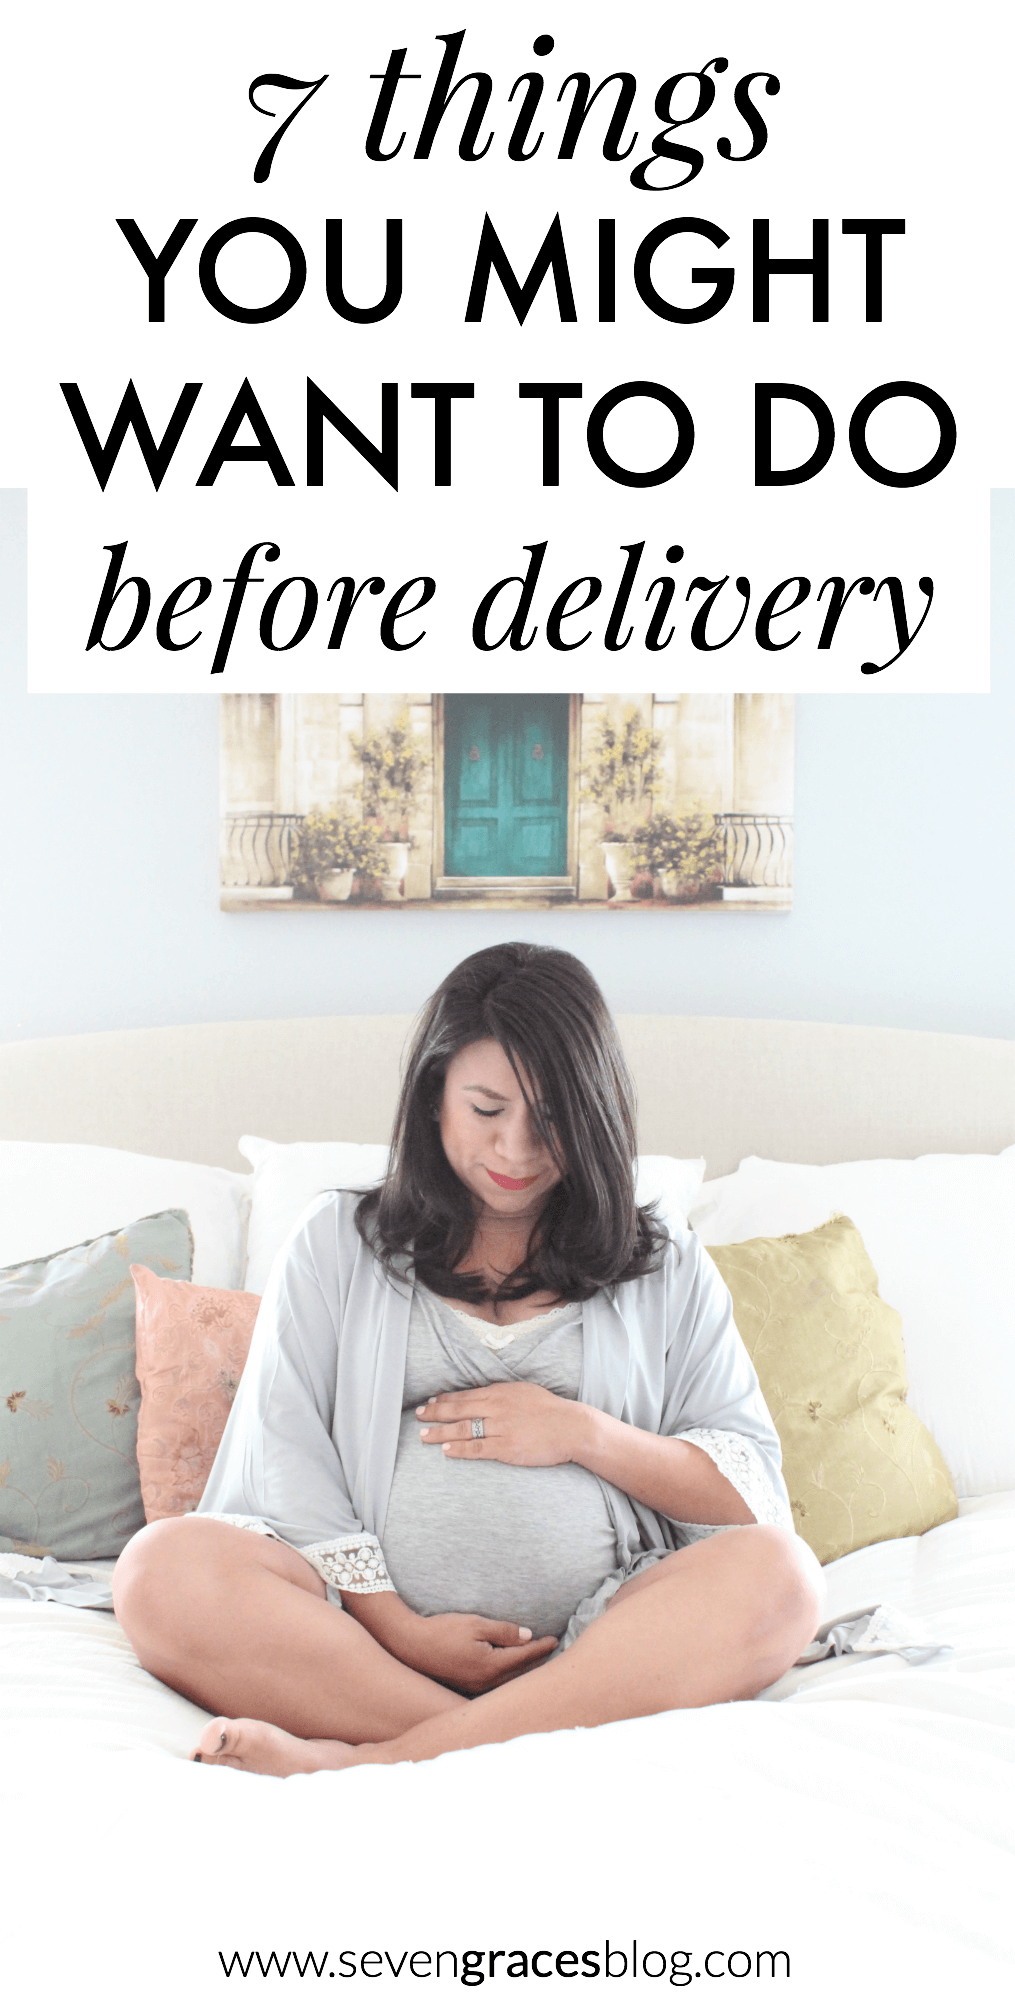 Getting ready for baby: 7 things you might want to do before delivery. This is a great comprehensive list of all the things you will want to take care of before welcoming a new baby. What needs to be on your to-do list before baby? This baby prep list is the best! 